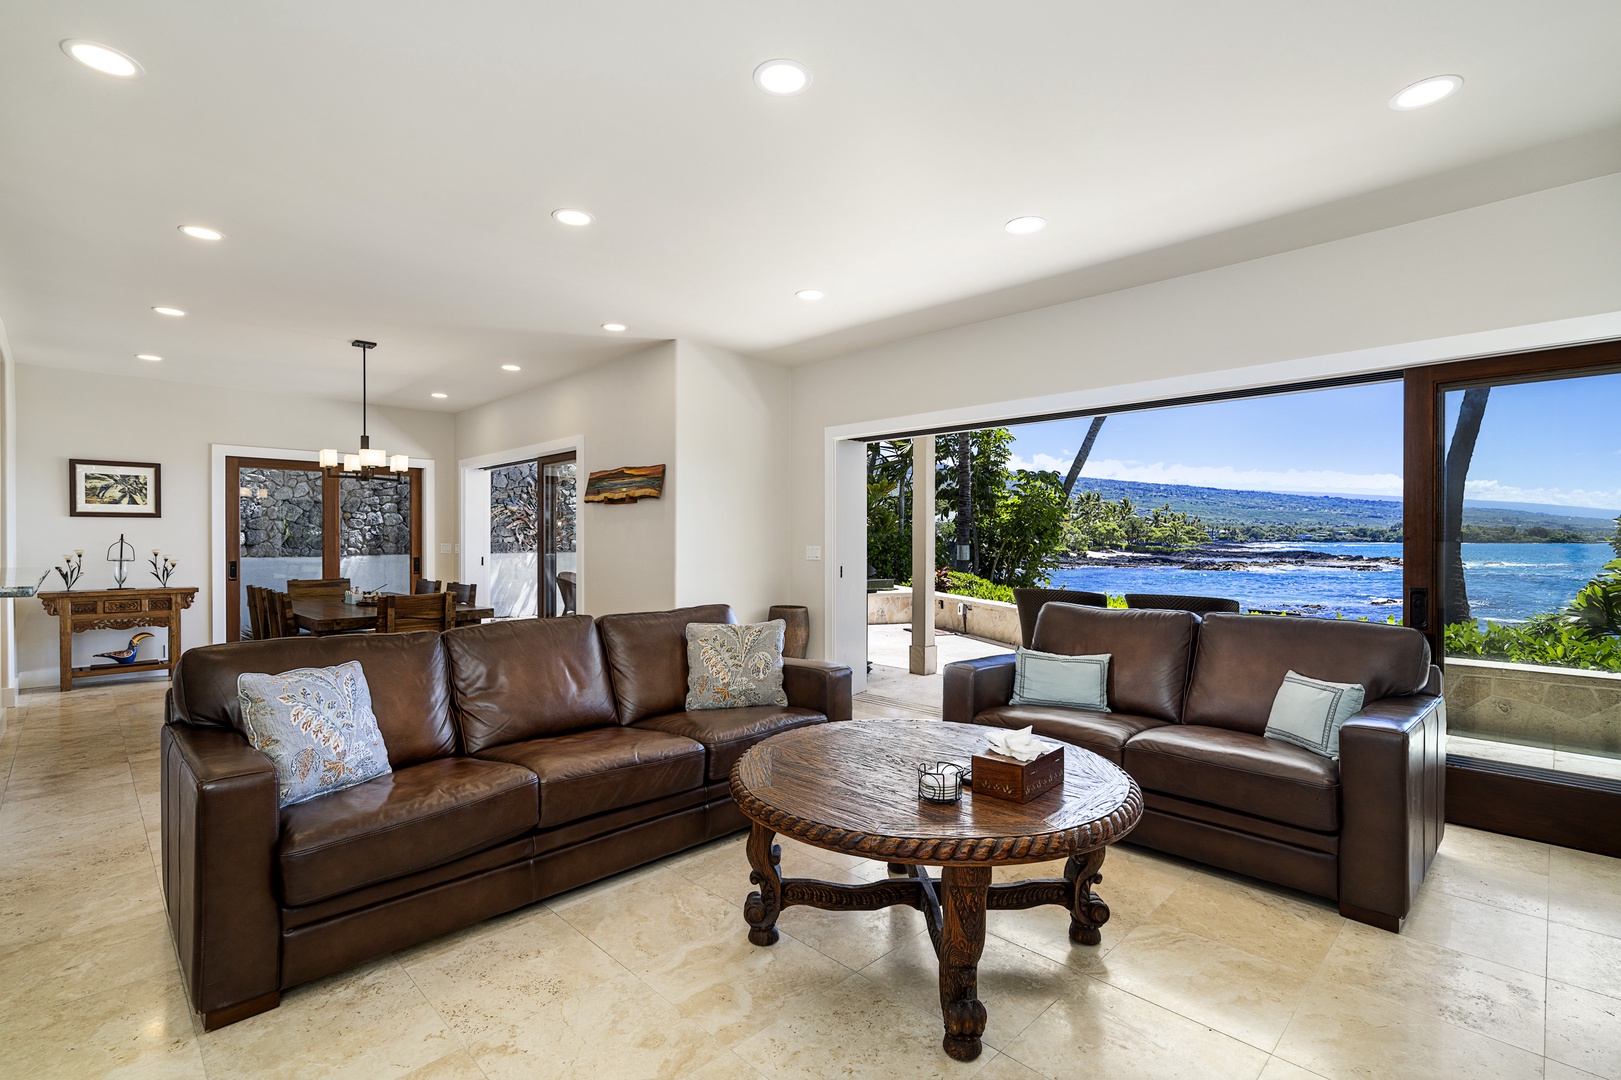 Kailua Kona Vacation Rentals, Ali'i Point #7 - As you enter this multi-level house, you will be greeted by an expansive and spacious living room area that boasts oversized leather comfy sofas, a large HD TV, and sliding doors that open to the lanai and ocean beyond